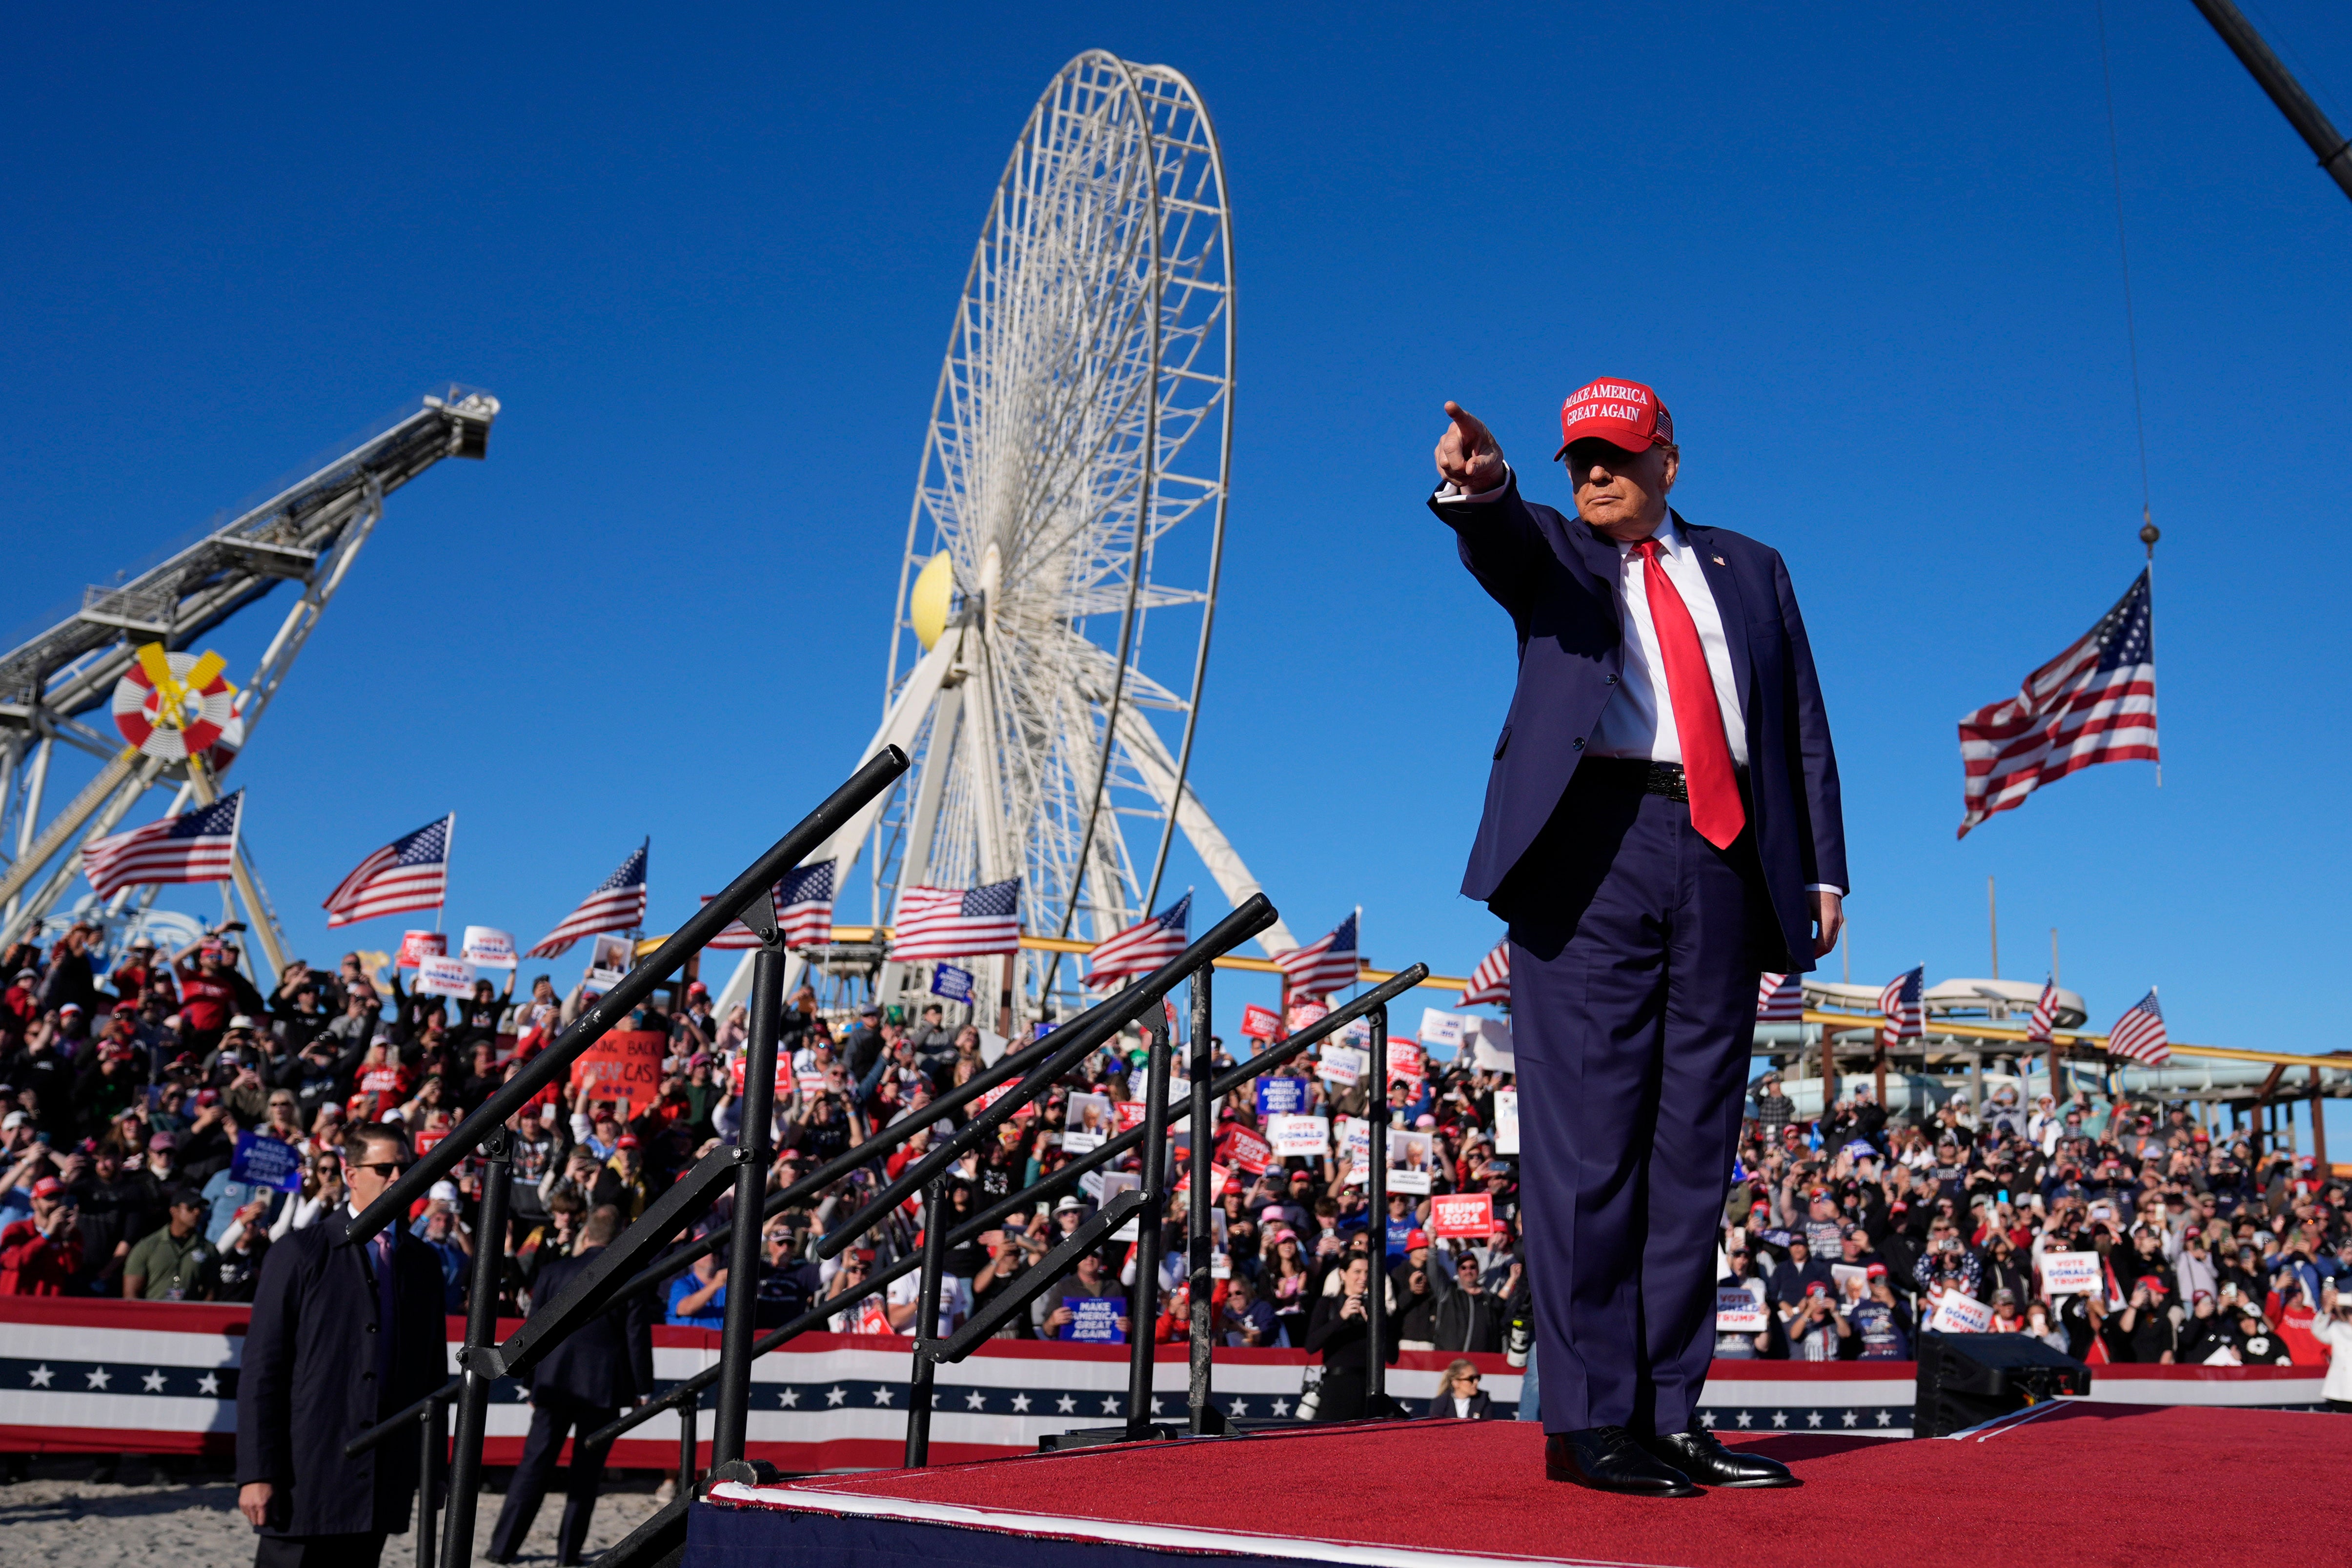 Donald Trump at the Wildwood rally where the Proud Boys provided ‘security’